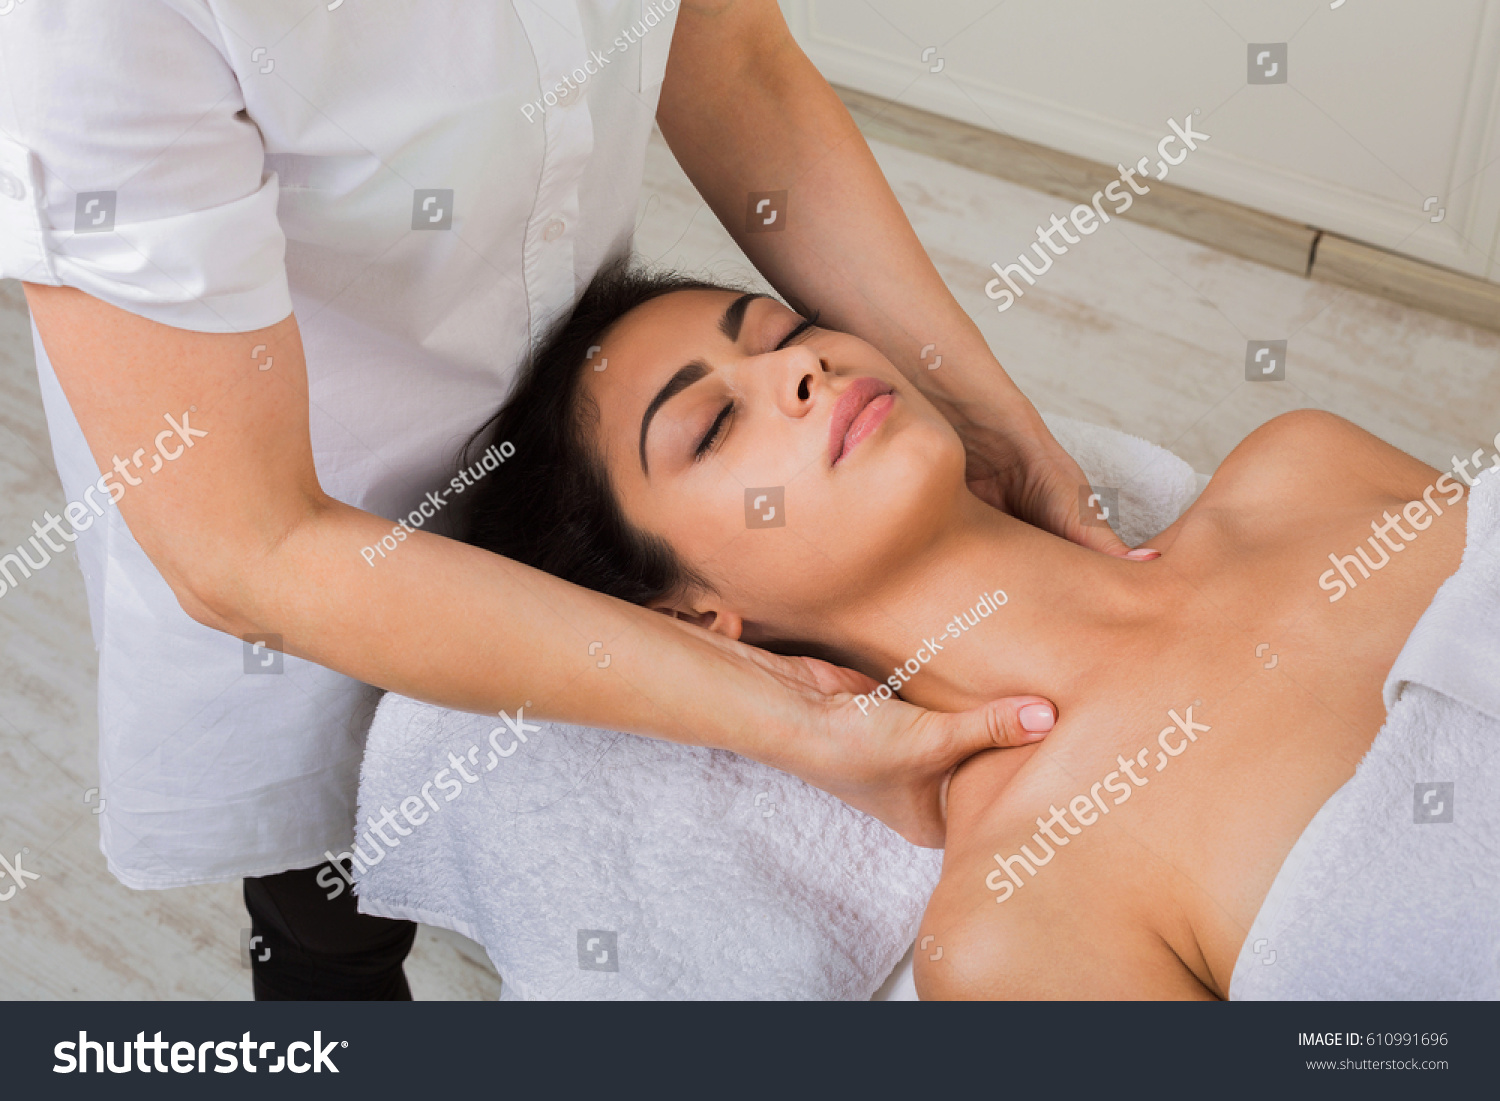 Getting a nice throat massage at the parlor